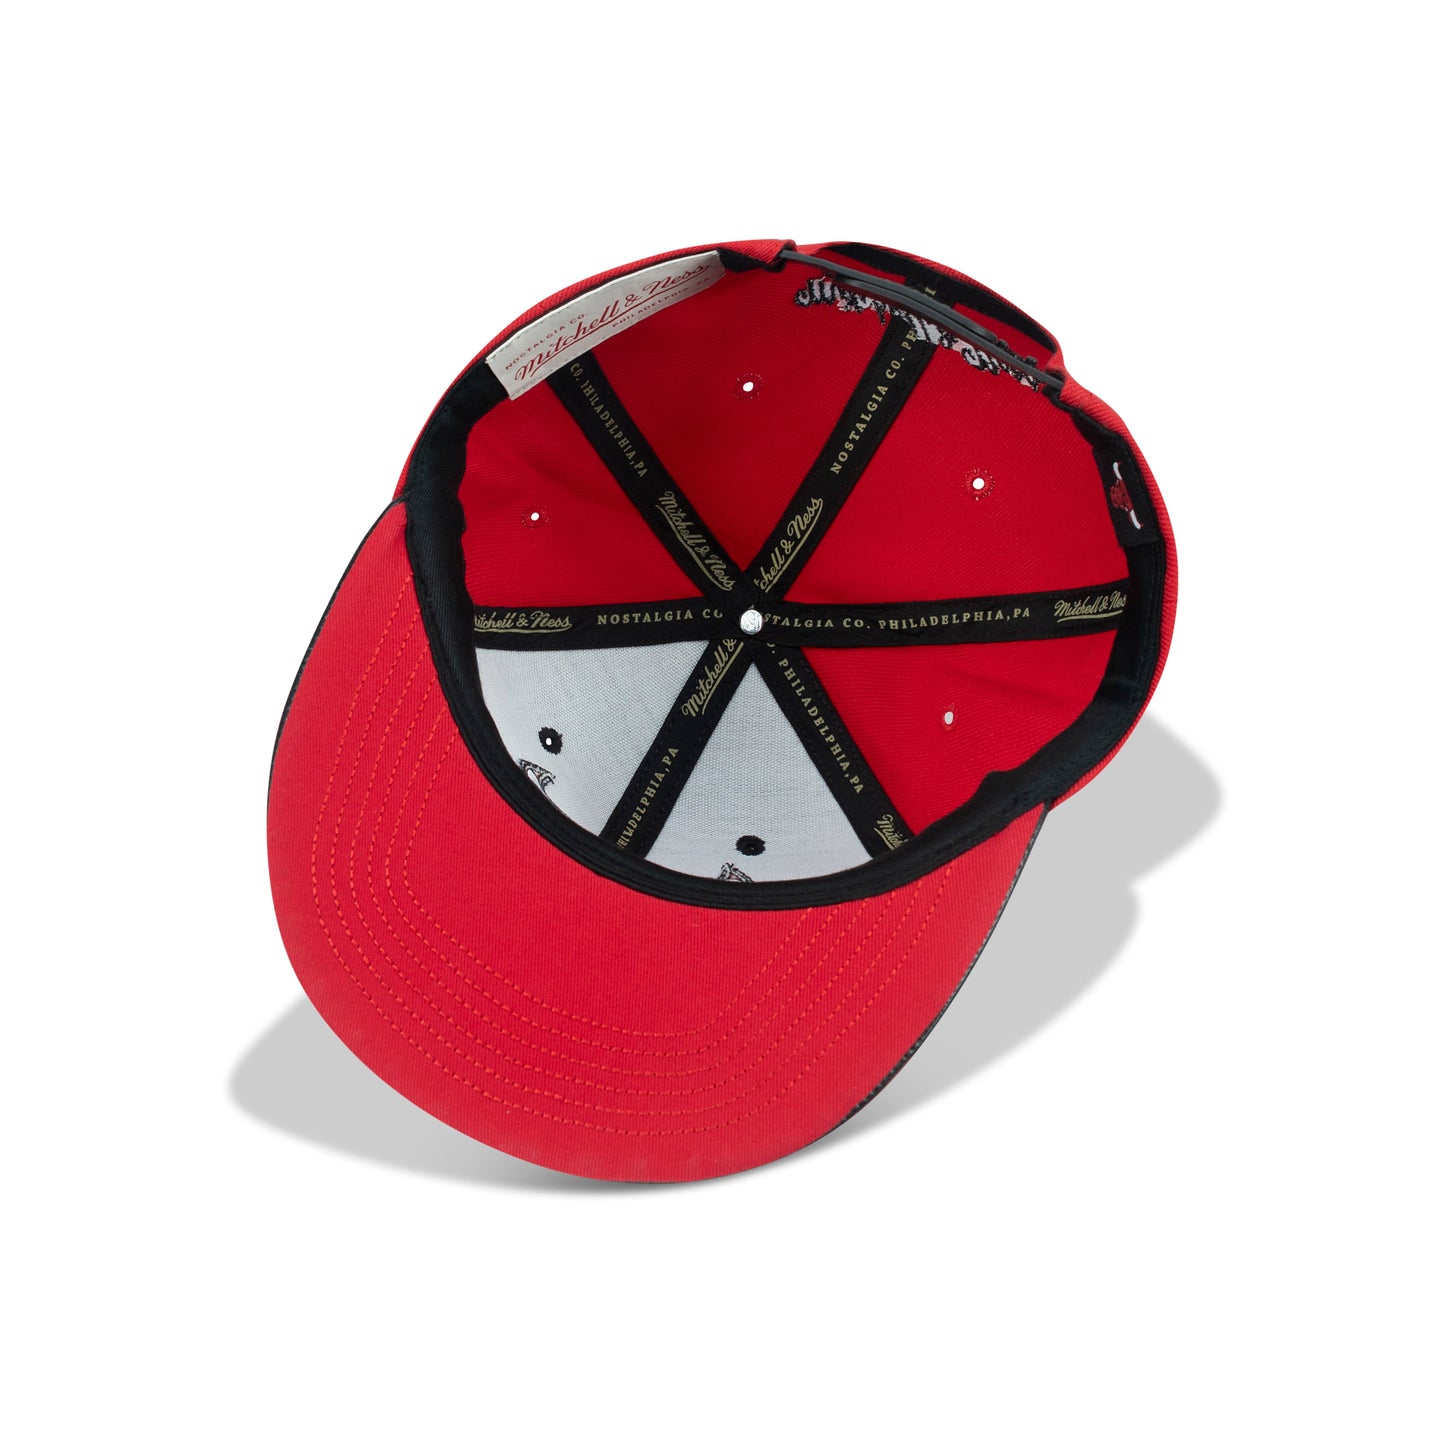 Mitchell & Ness Chicago Bulls NBA Day One Snapback Red Bottom "Red Black"